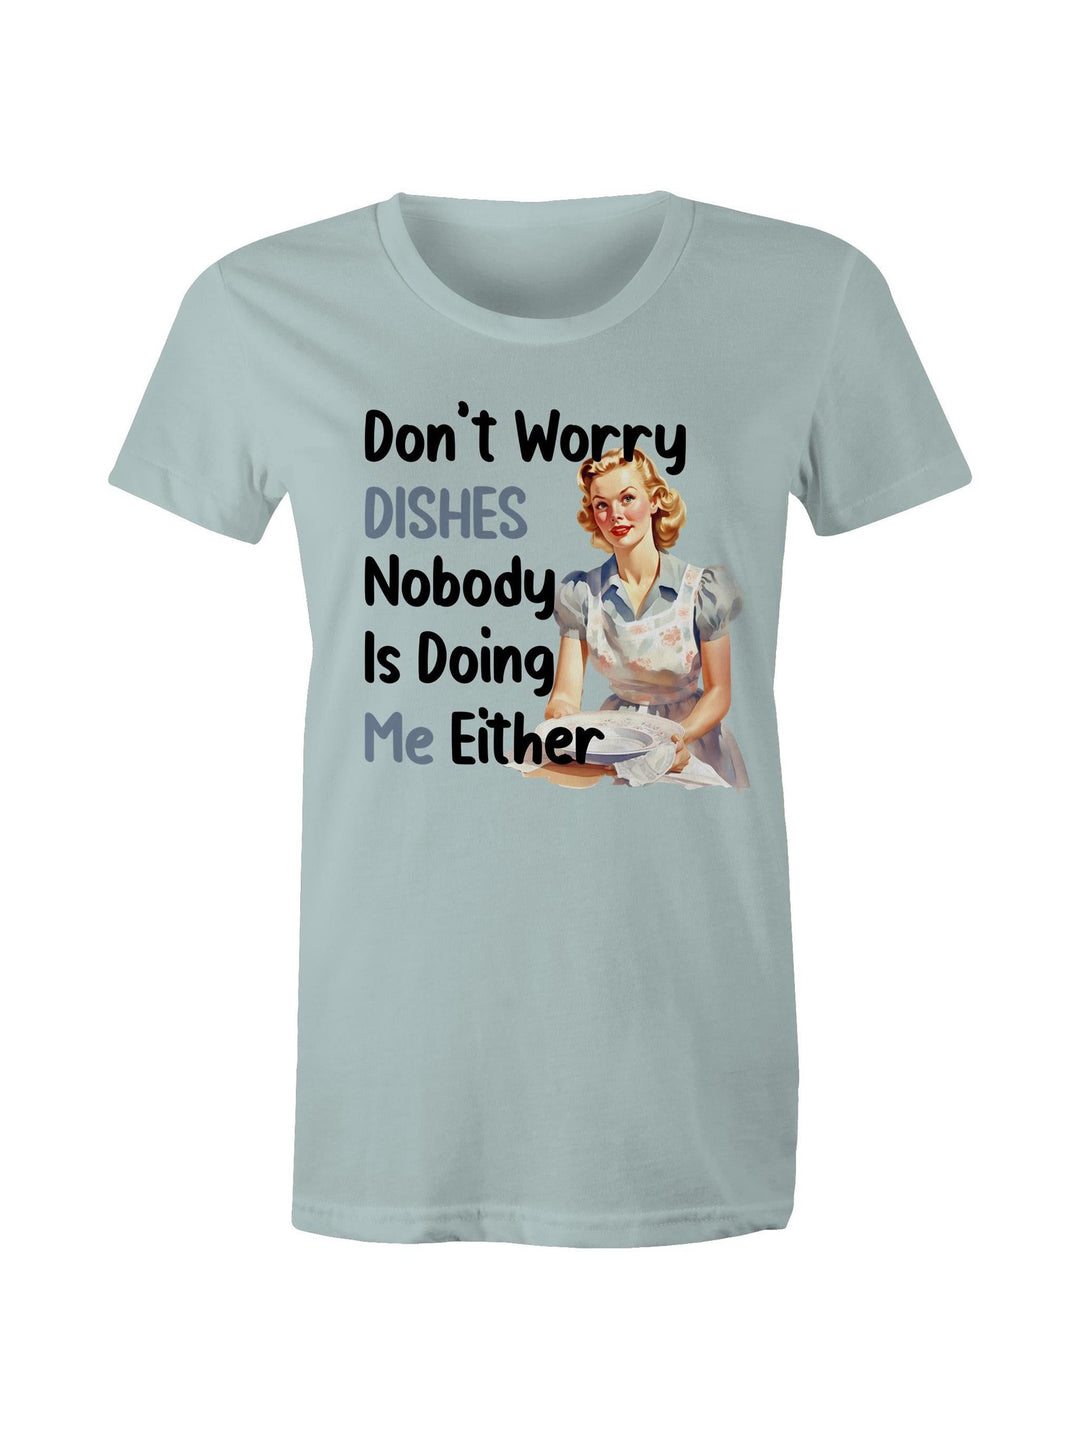 Don't Worry Dishes - Women's Tee